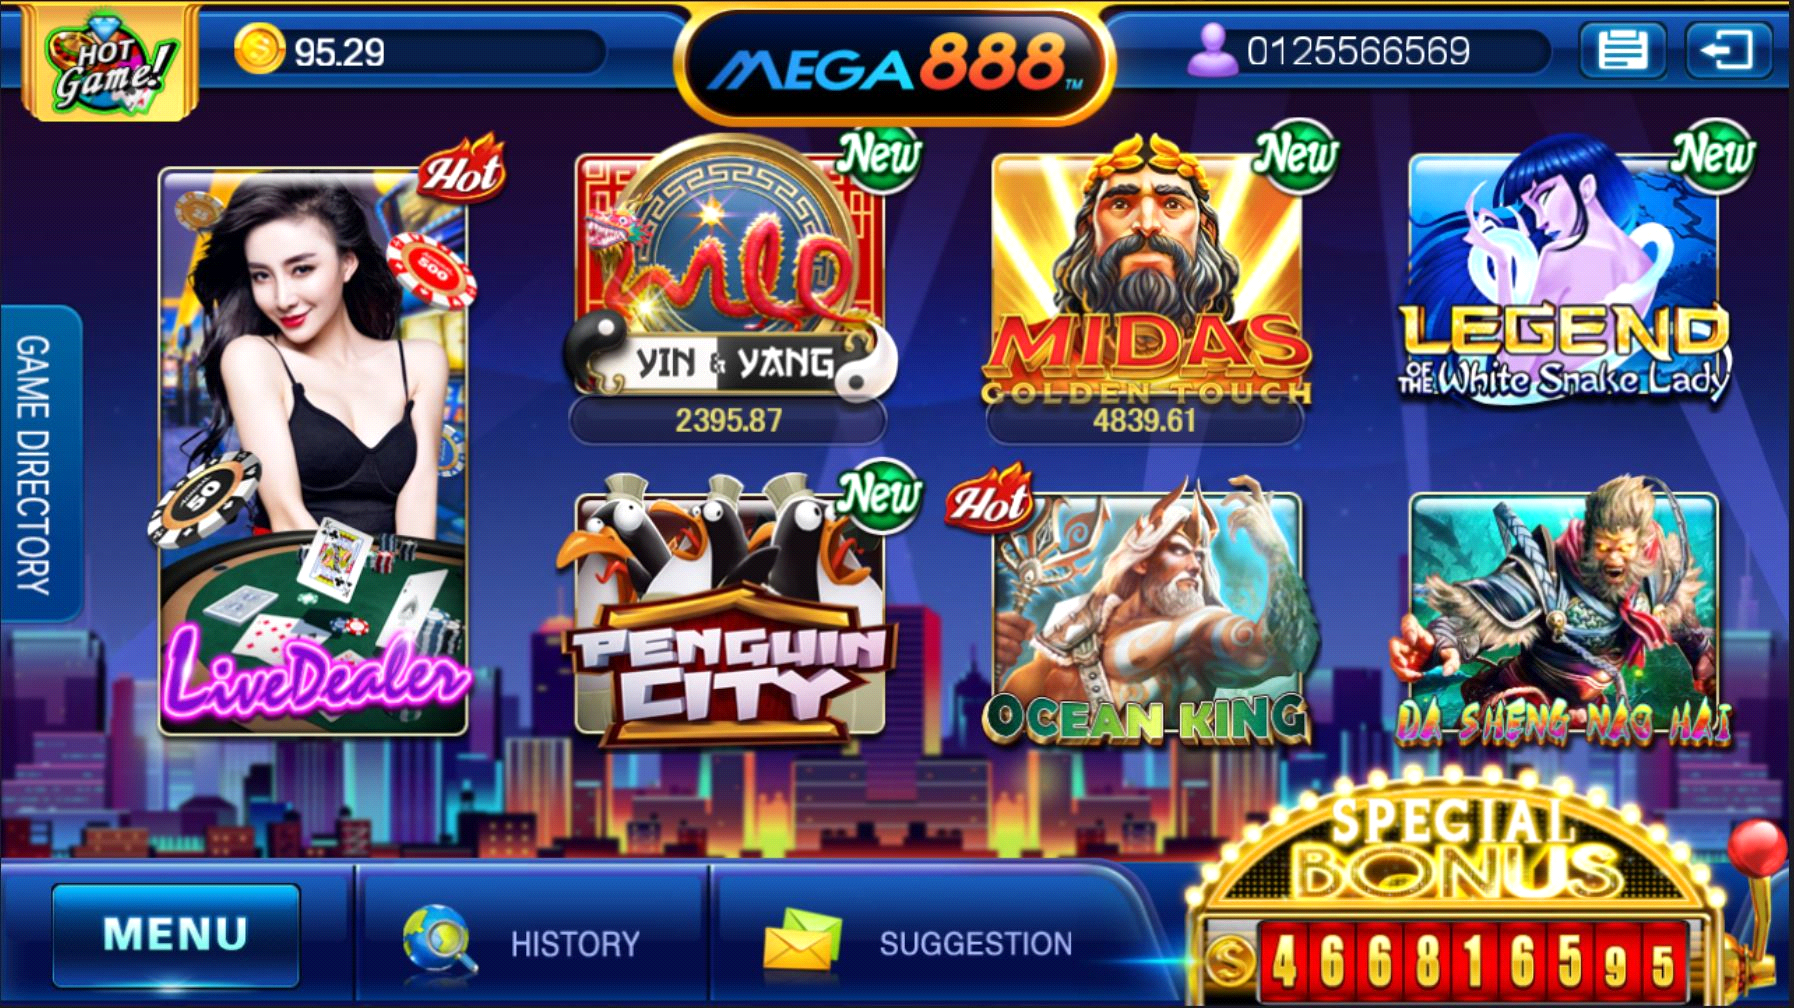 Download Mega888 for Android and IOS